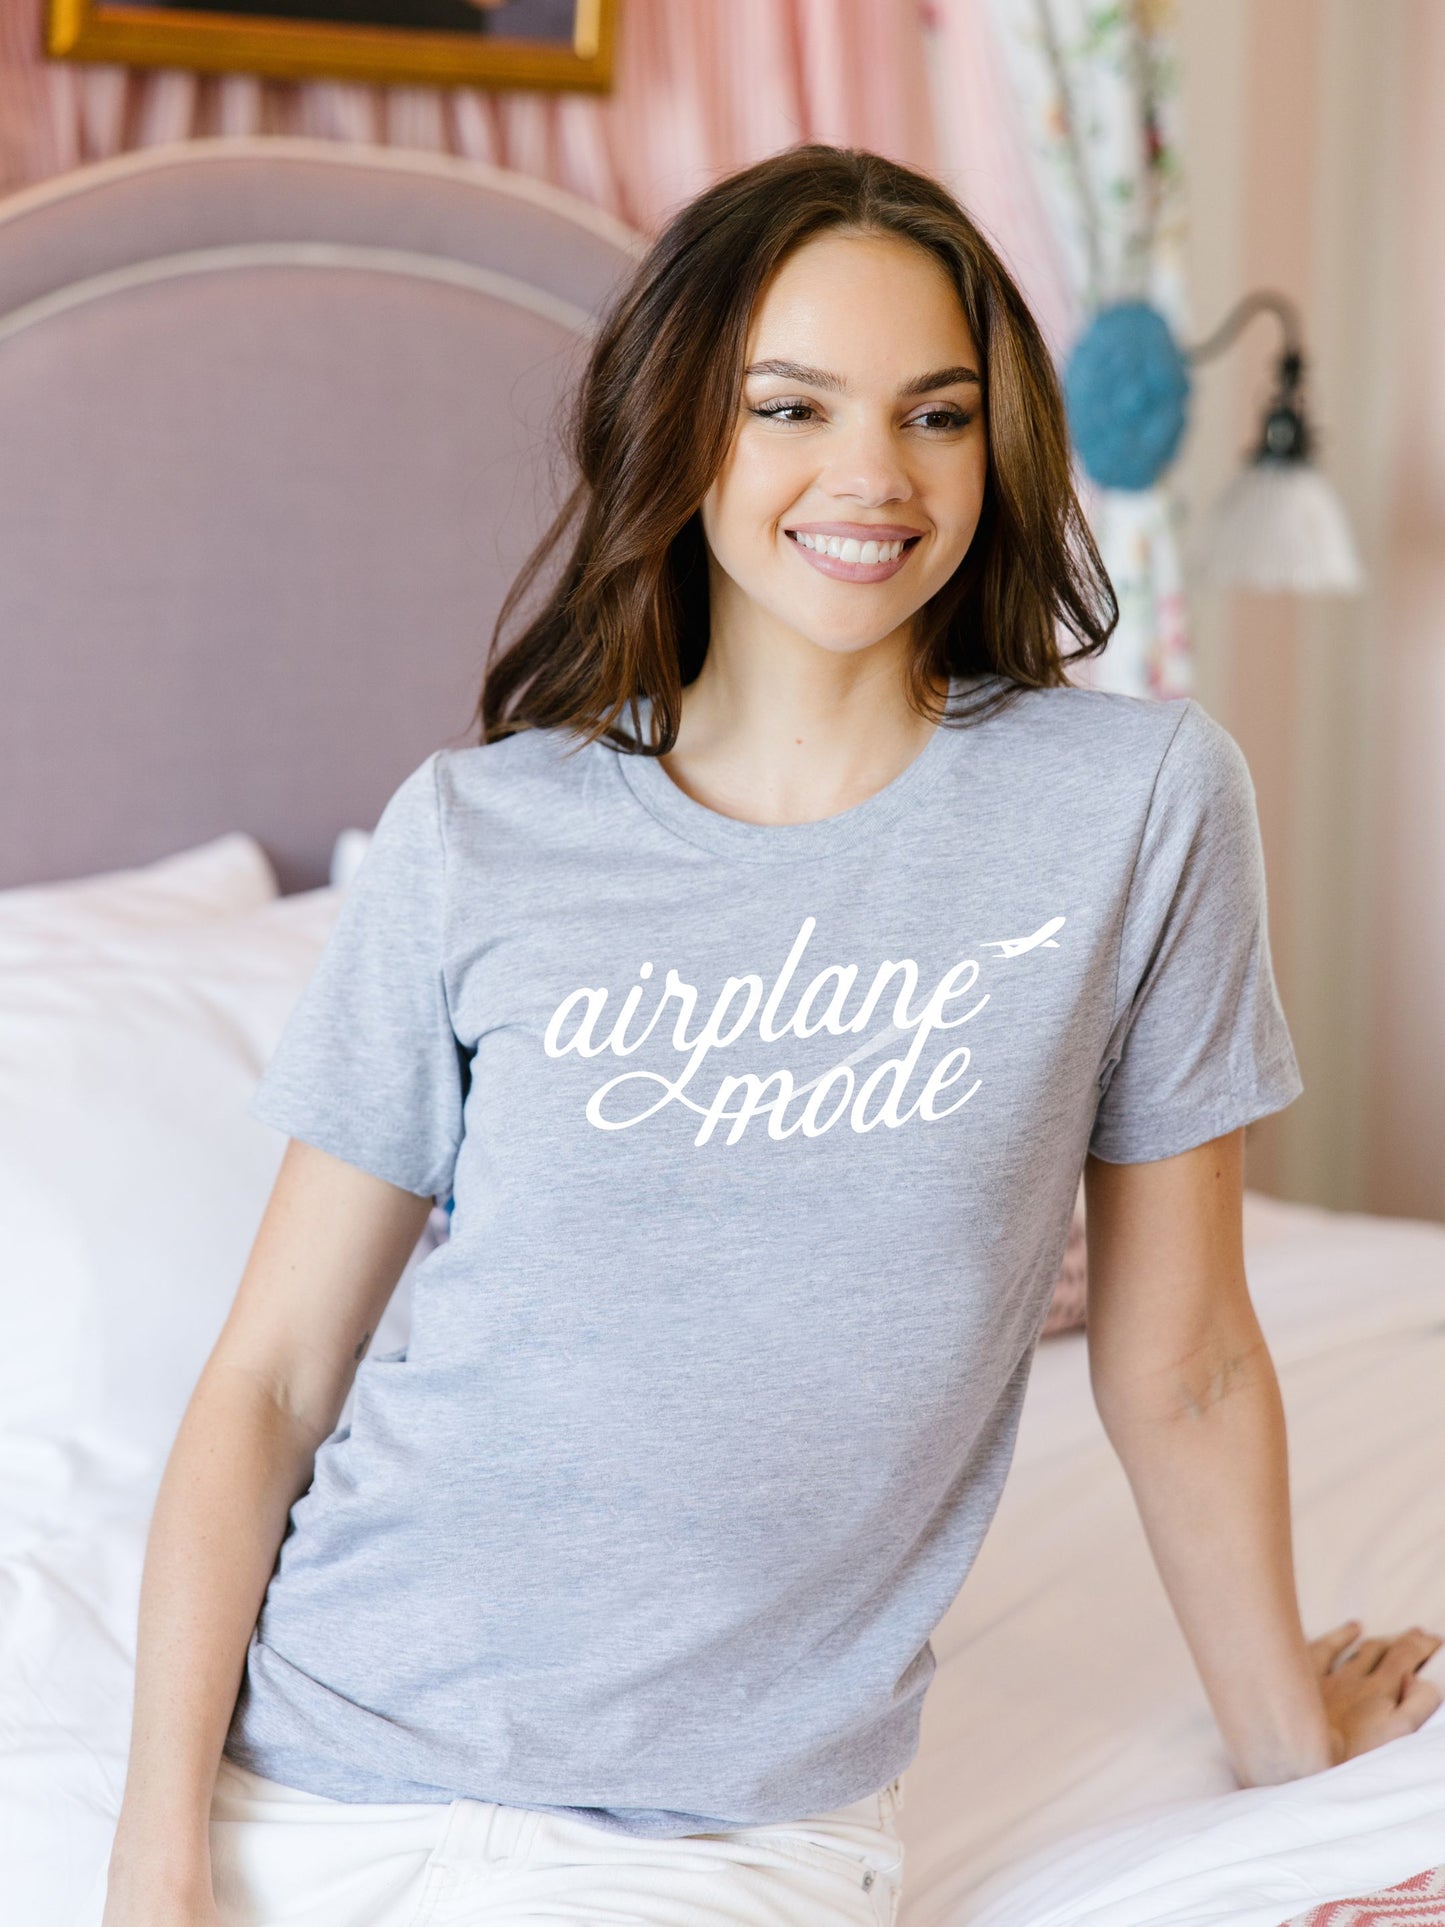 Airplane Mode Shirt for women in color grey